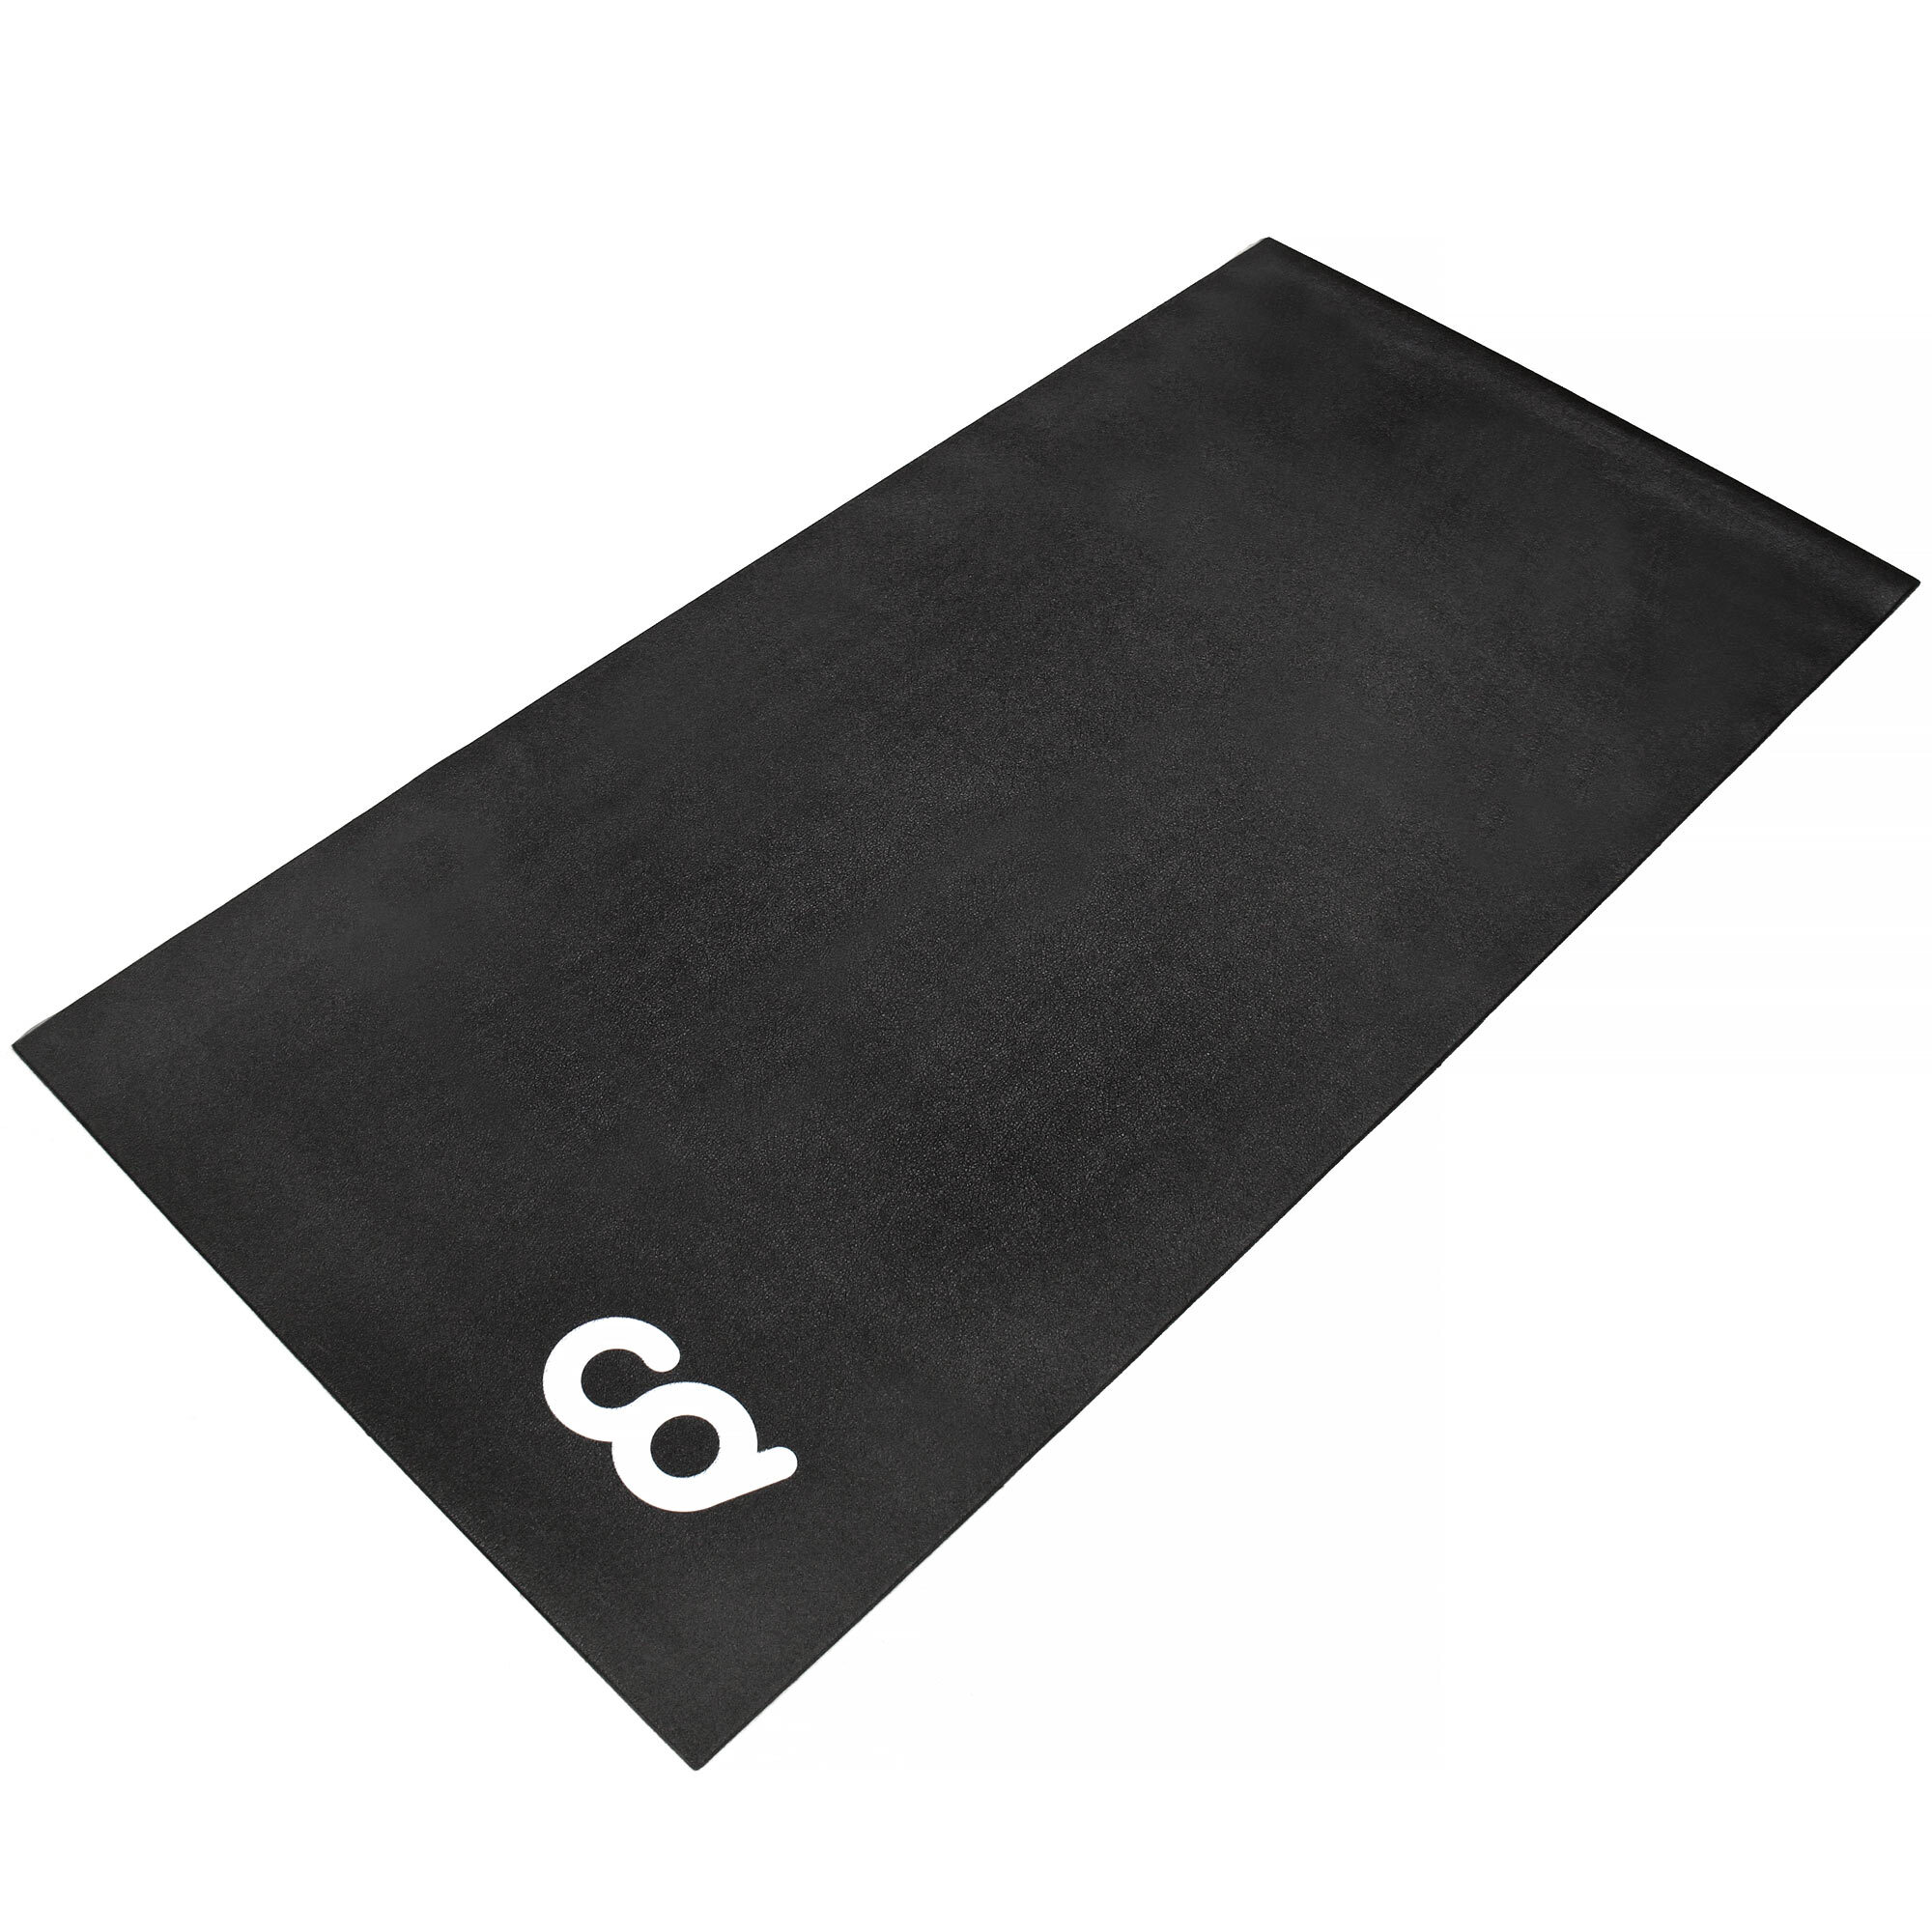 Bicycle Trainer Floor Mat (61 cm x 121cm)  Suits Ergo Mag Fluid for Indoor Cycles Stepper for Peloton Spin Bikes - Thick Mats For Exercise Equipment 